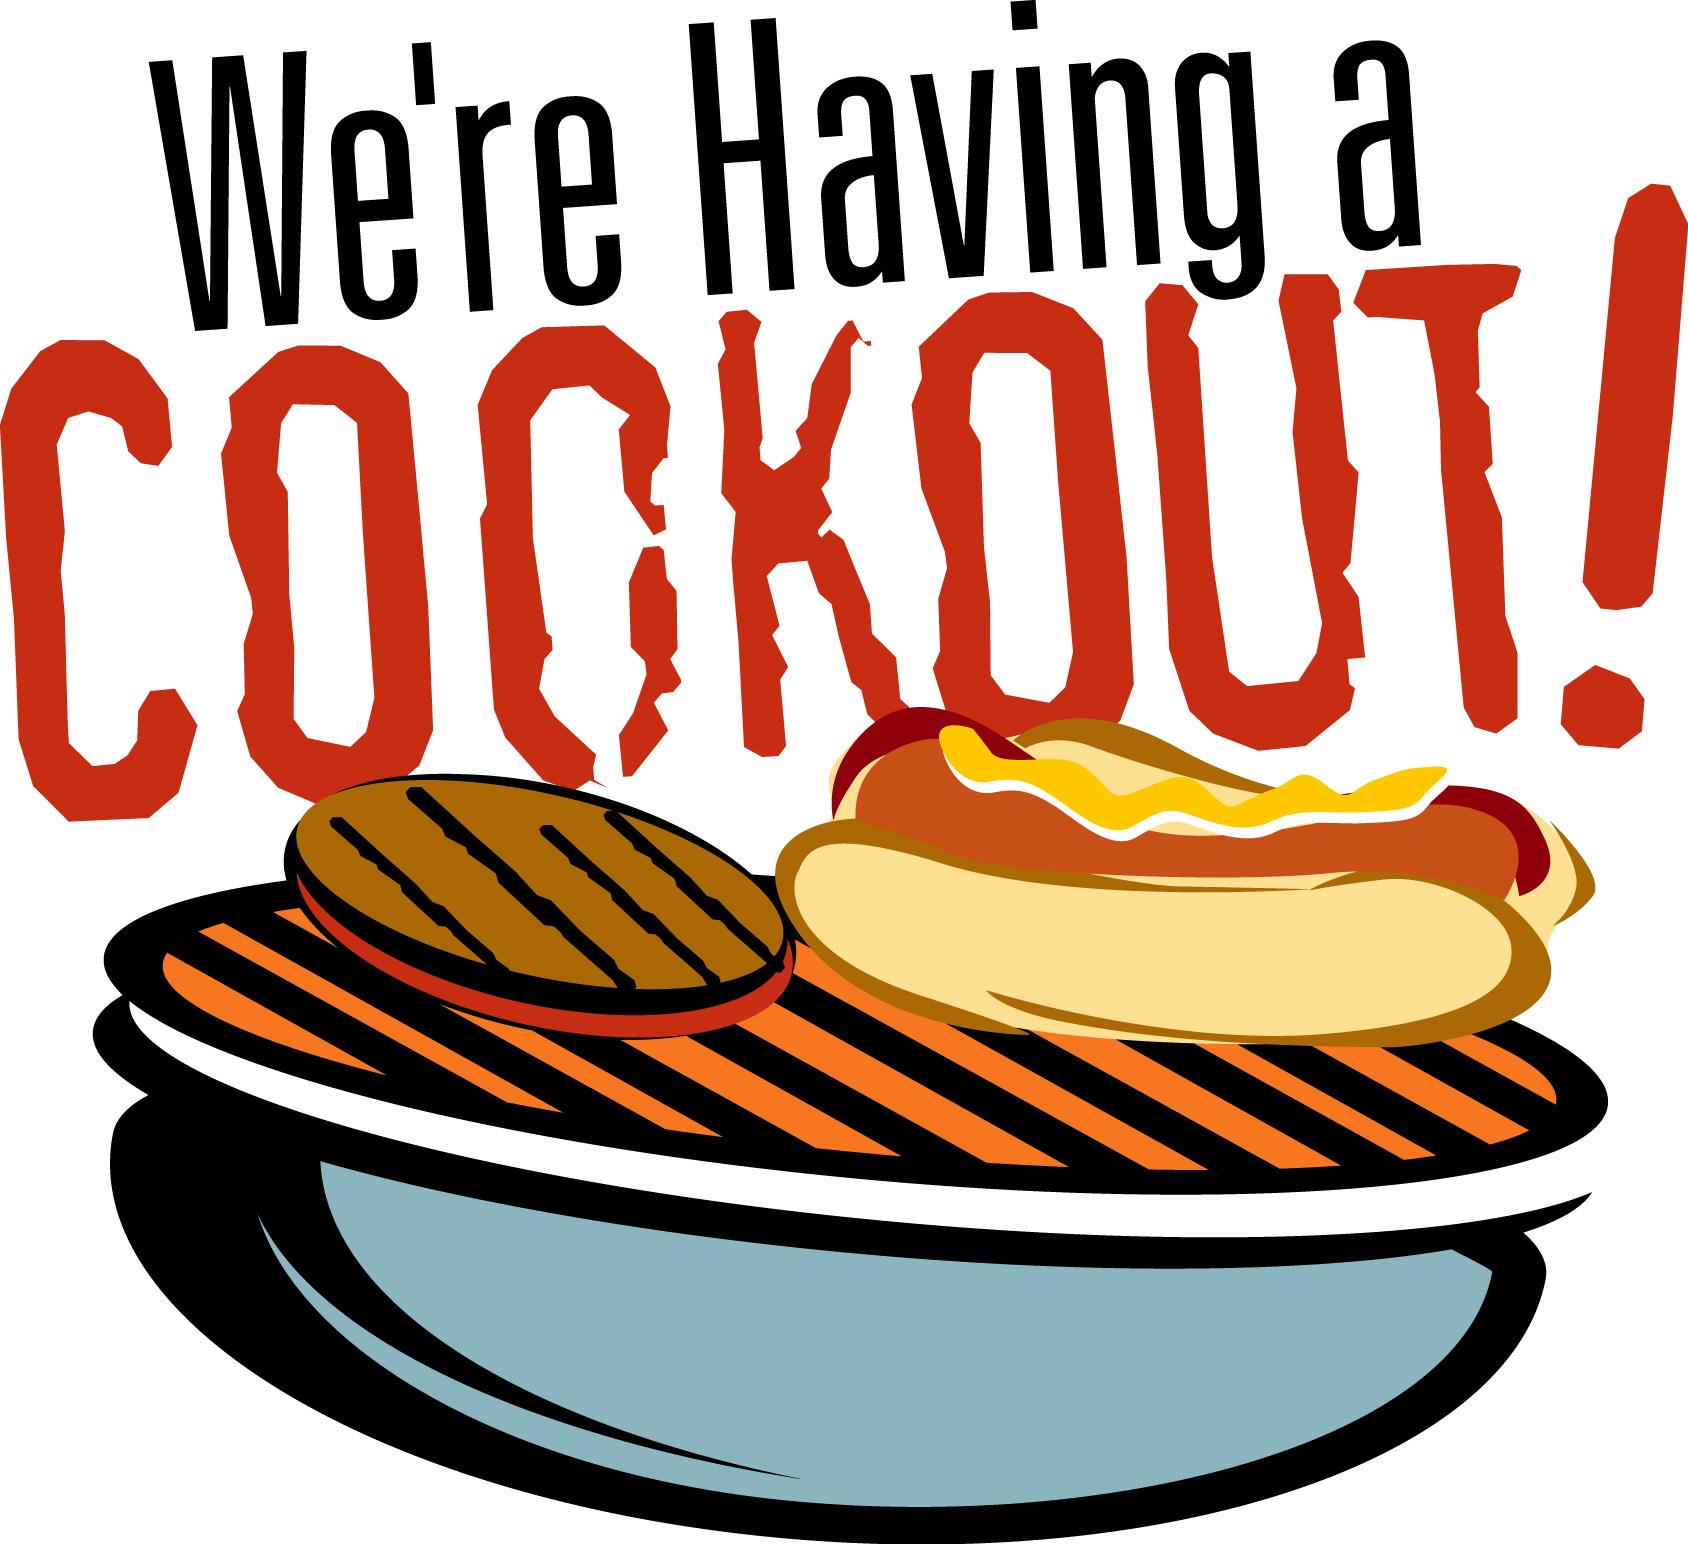 Cookout clipart end. Of the year immaculate